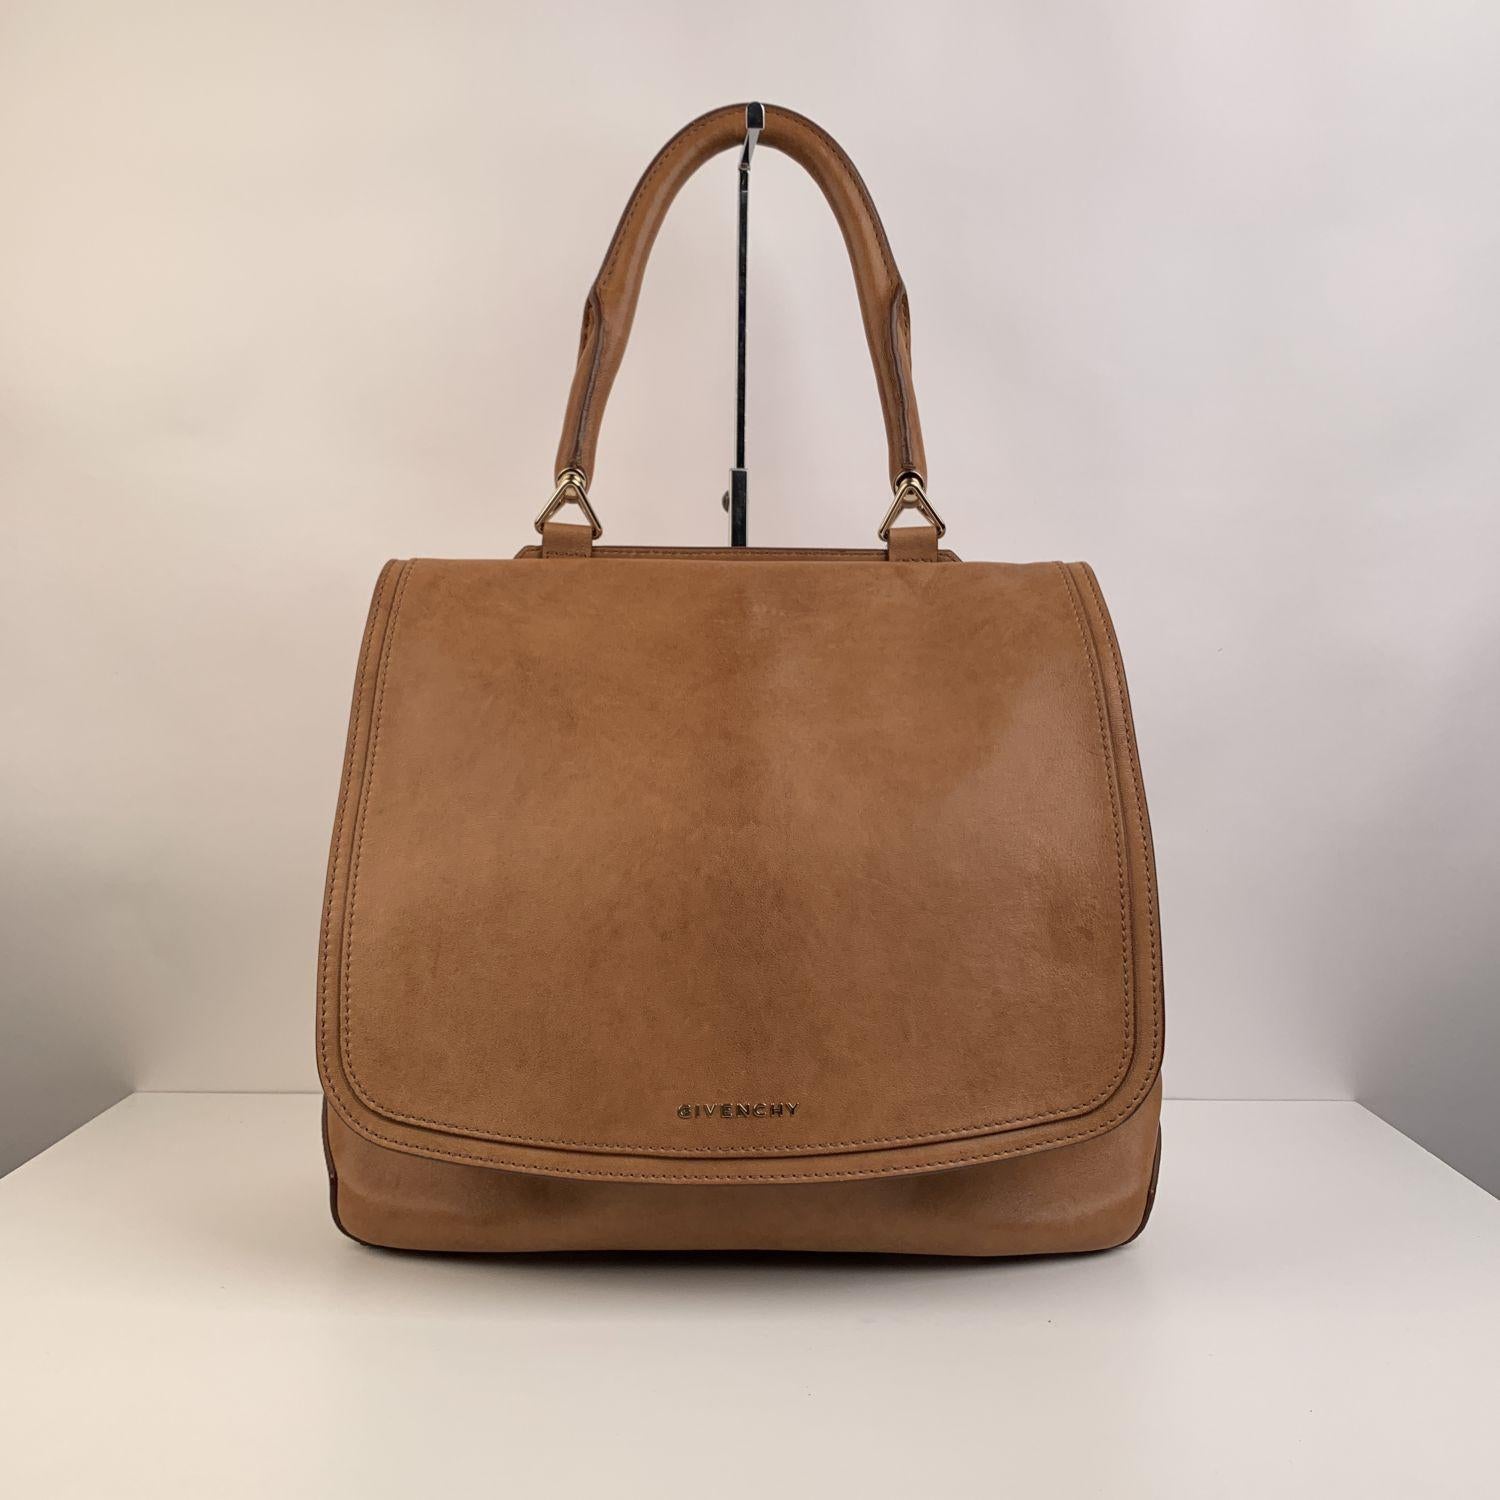 Givenchy New Line bag in tan leather. It features a large front flap, a single handle and gold metal hardware. 1 rear zip pocket. Beige fabric lining with two flat pockets and one zip pocket inside. 'Givenchy tag inside



Details

MATERIAL: